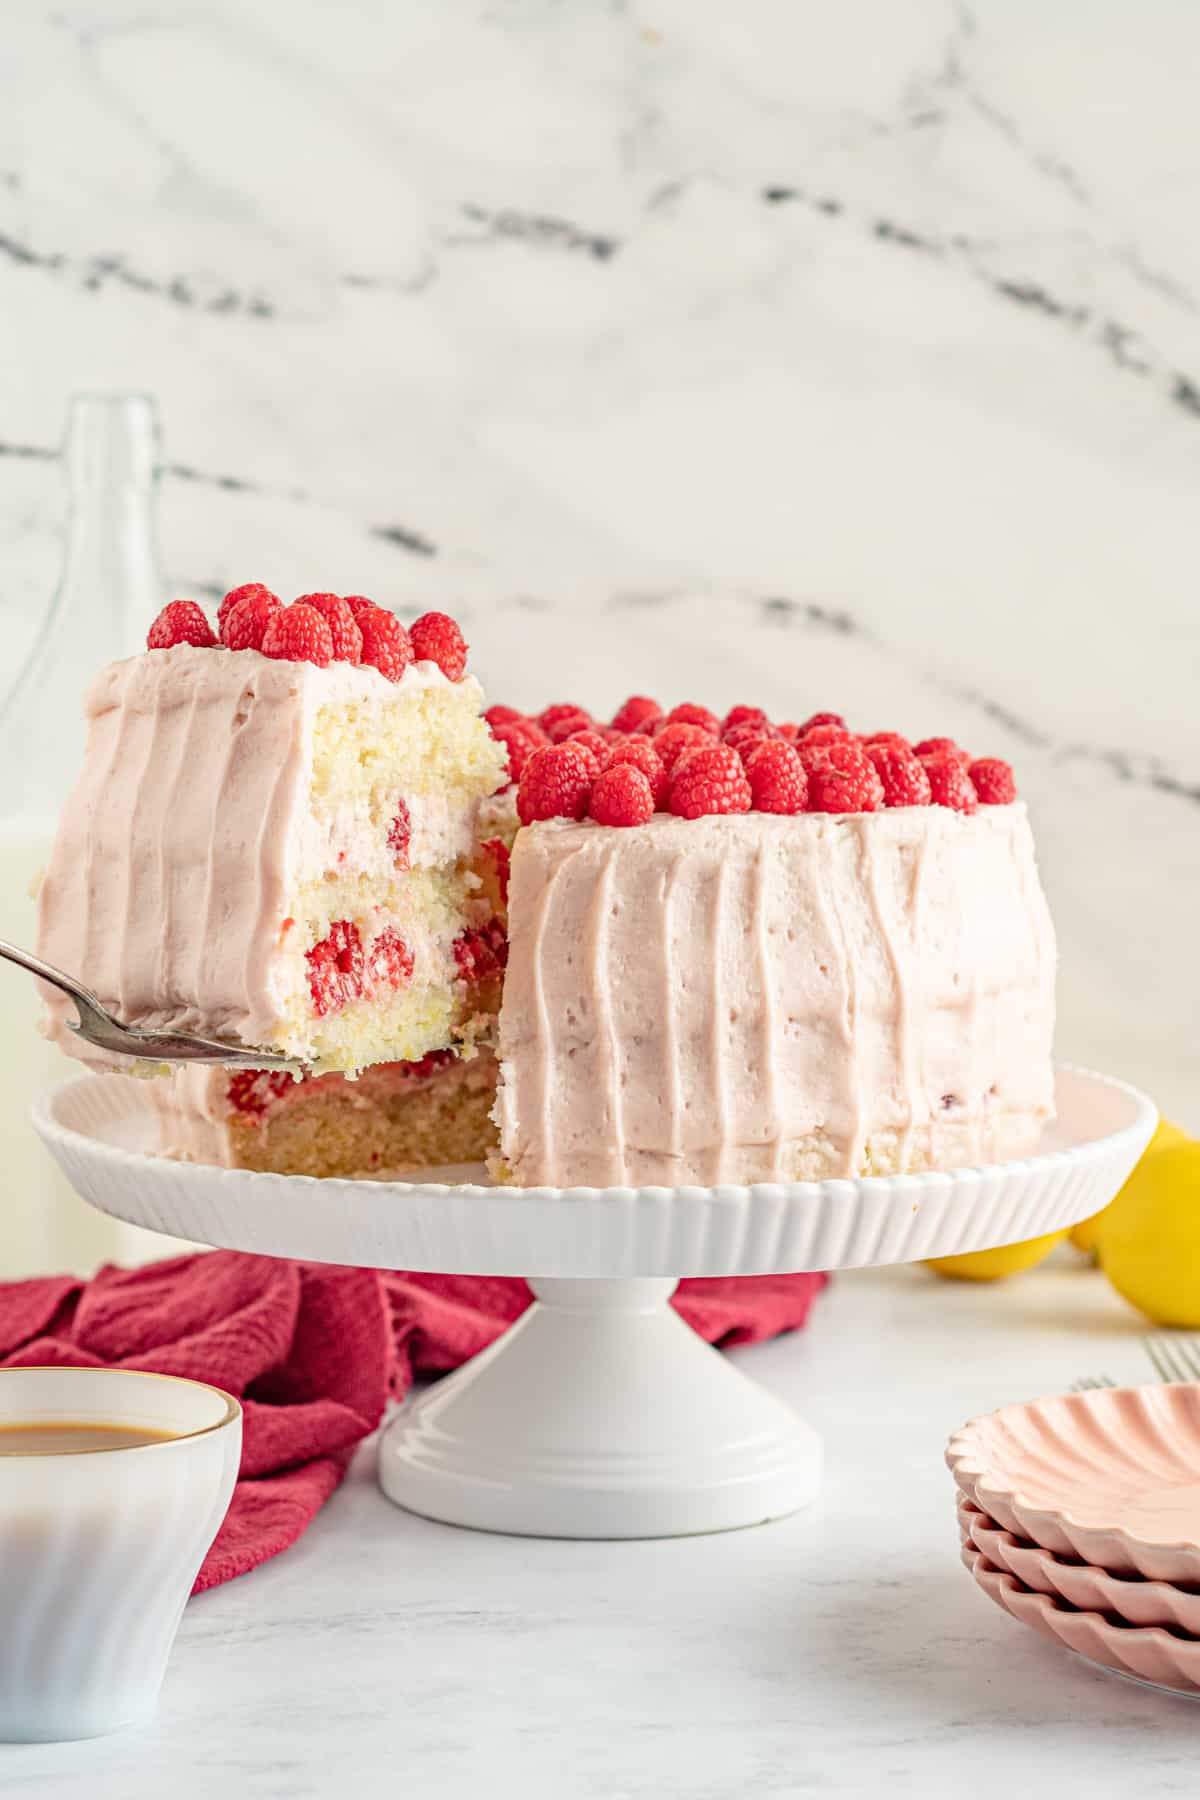 Slice of cake being lifted from the lemon and raspberry layer cake.